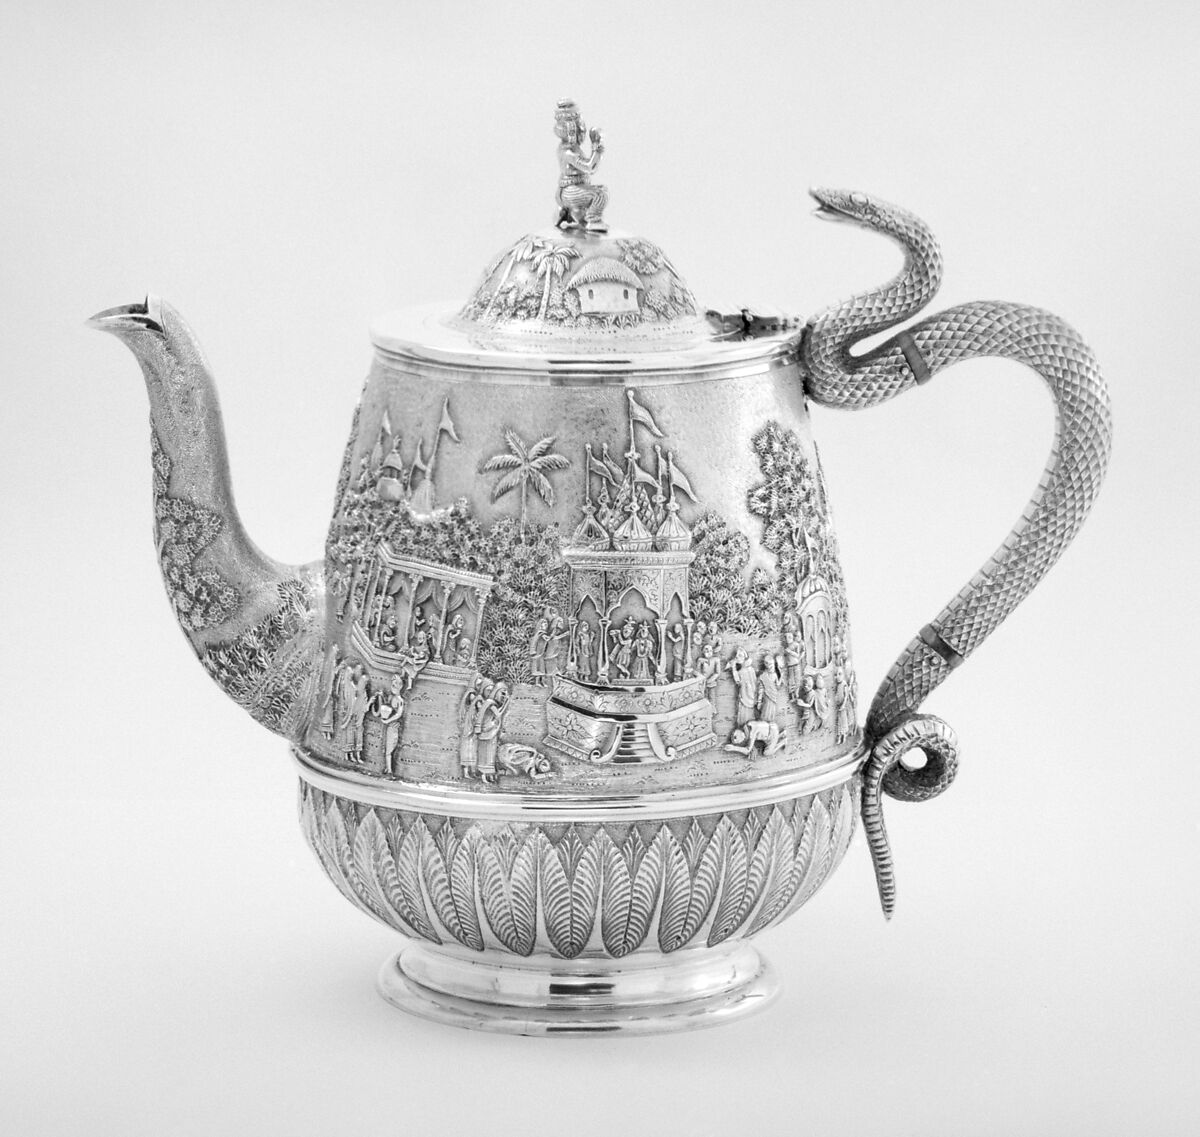 Teapot (part of a set), Silver, Anglo-Indian 